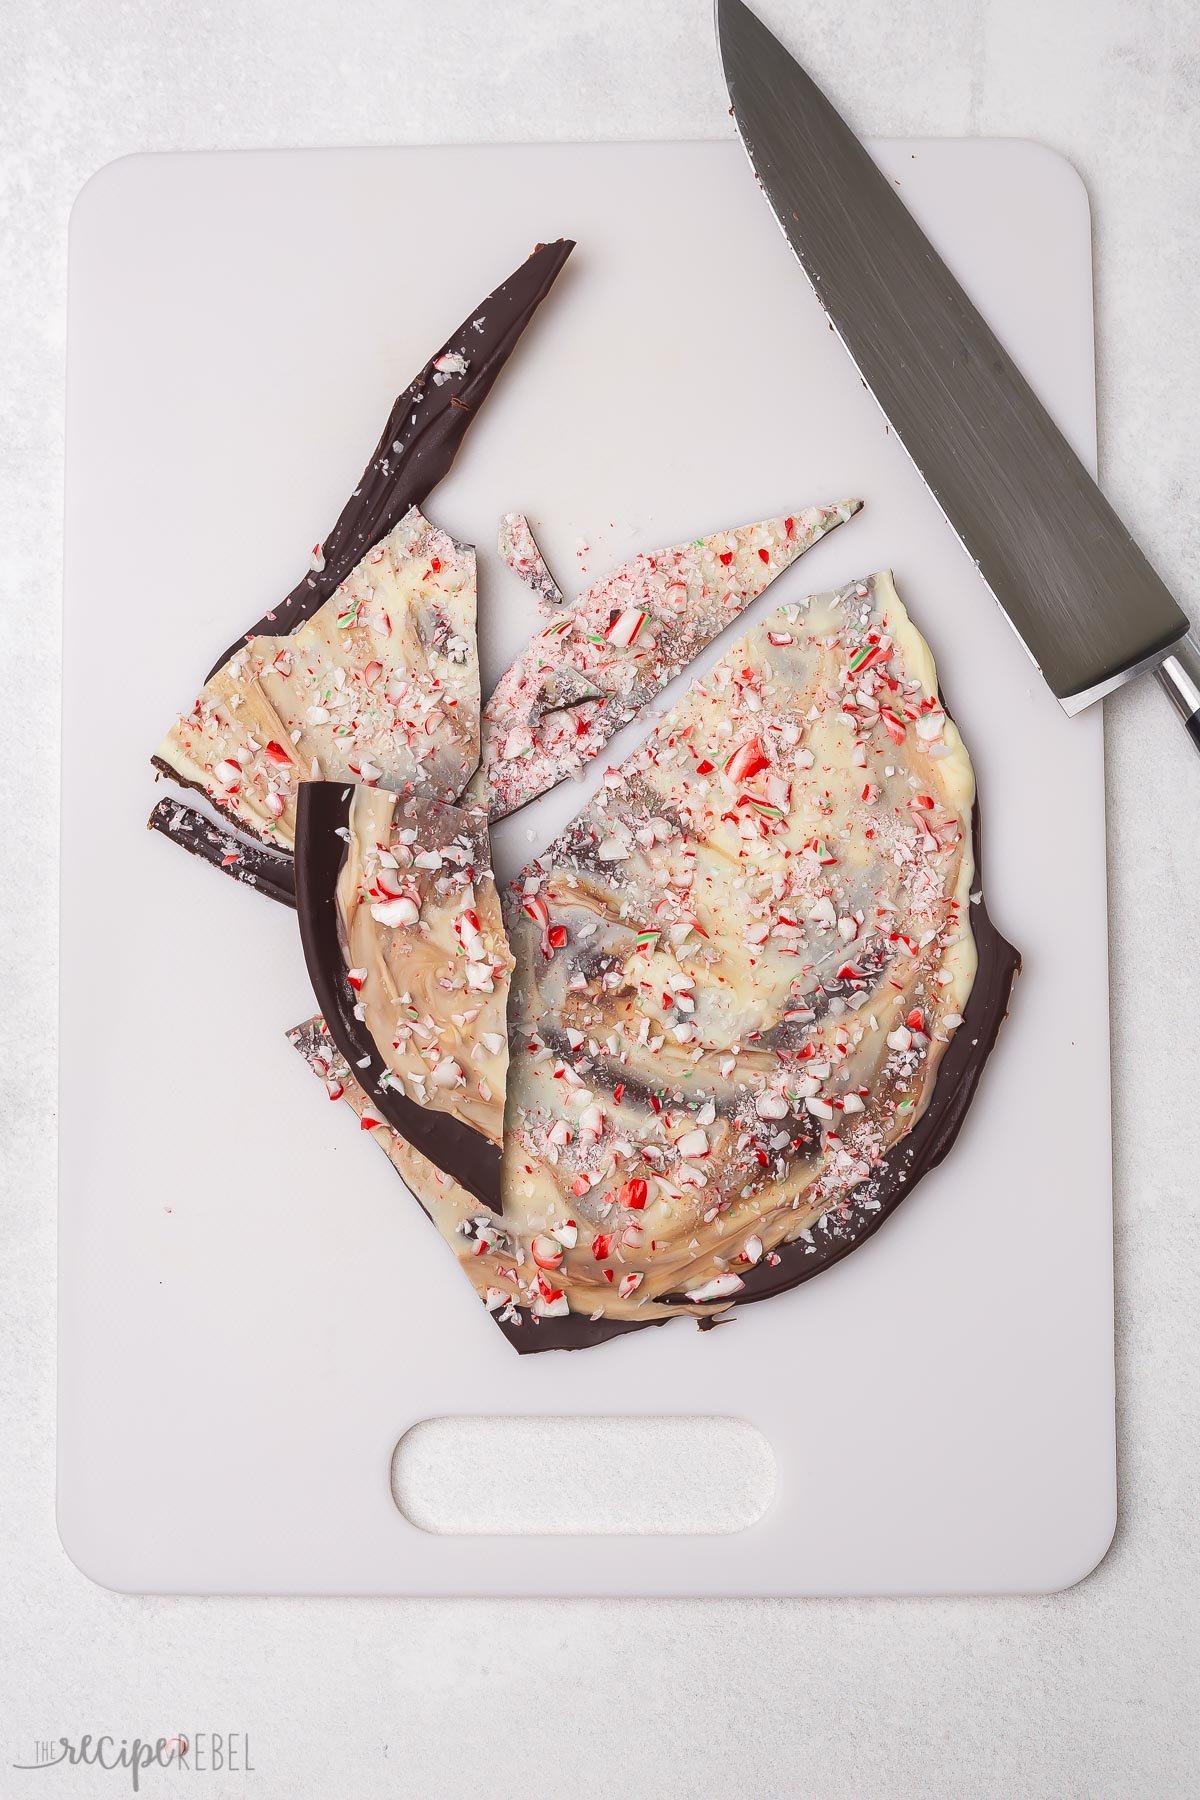 peppermint bark on white cutting board with knife.